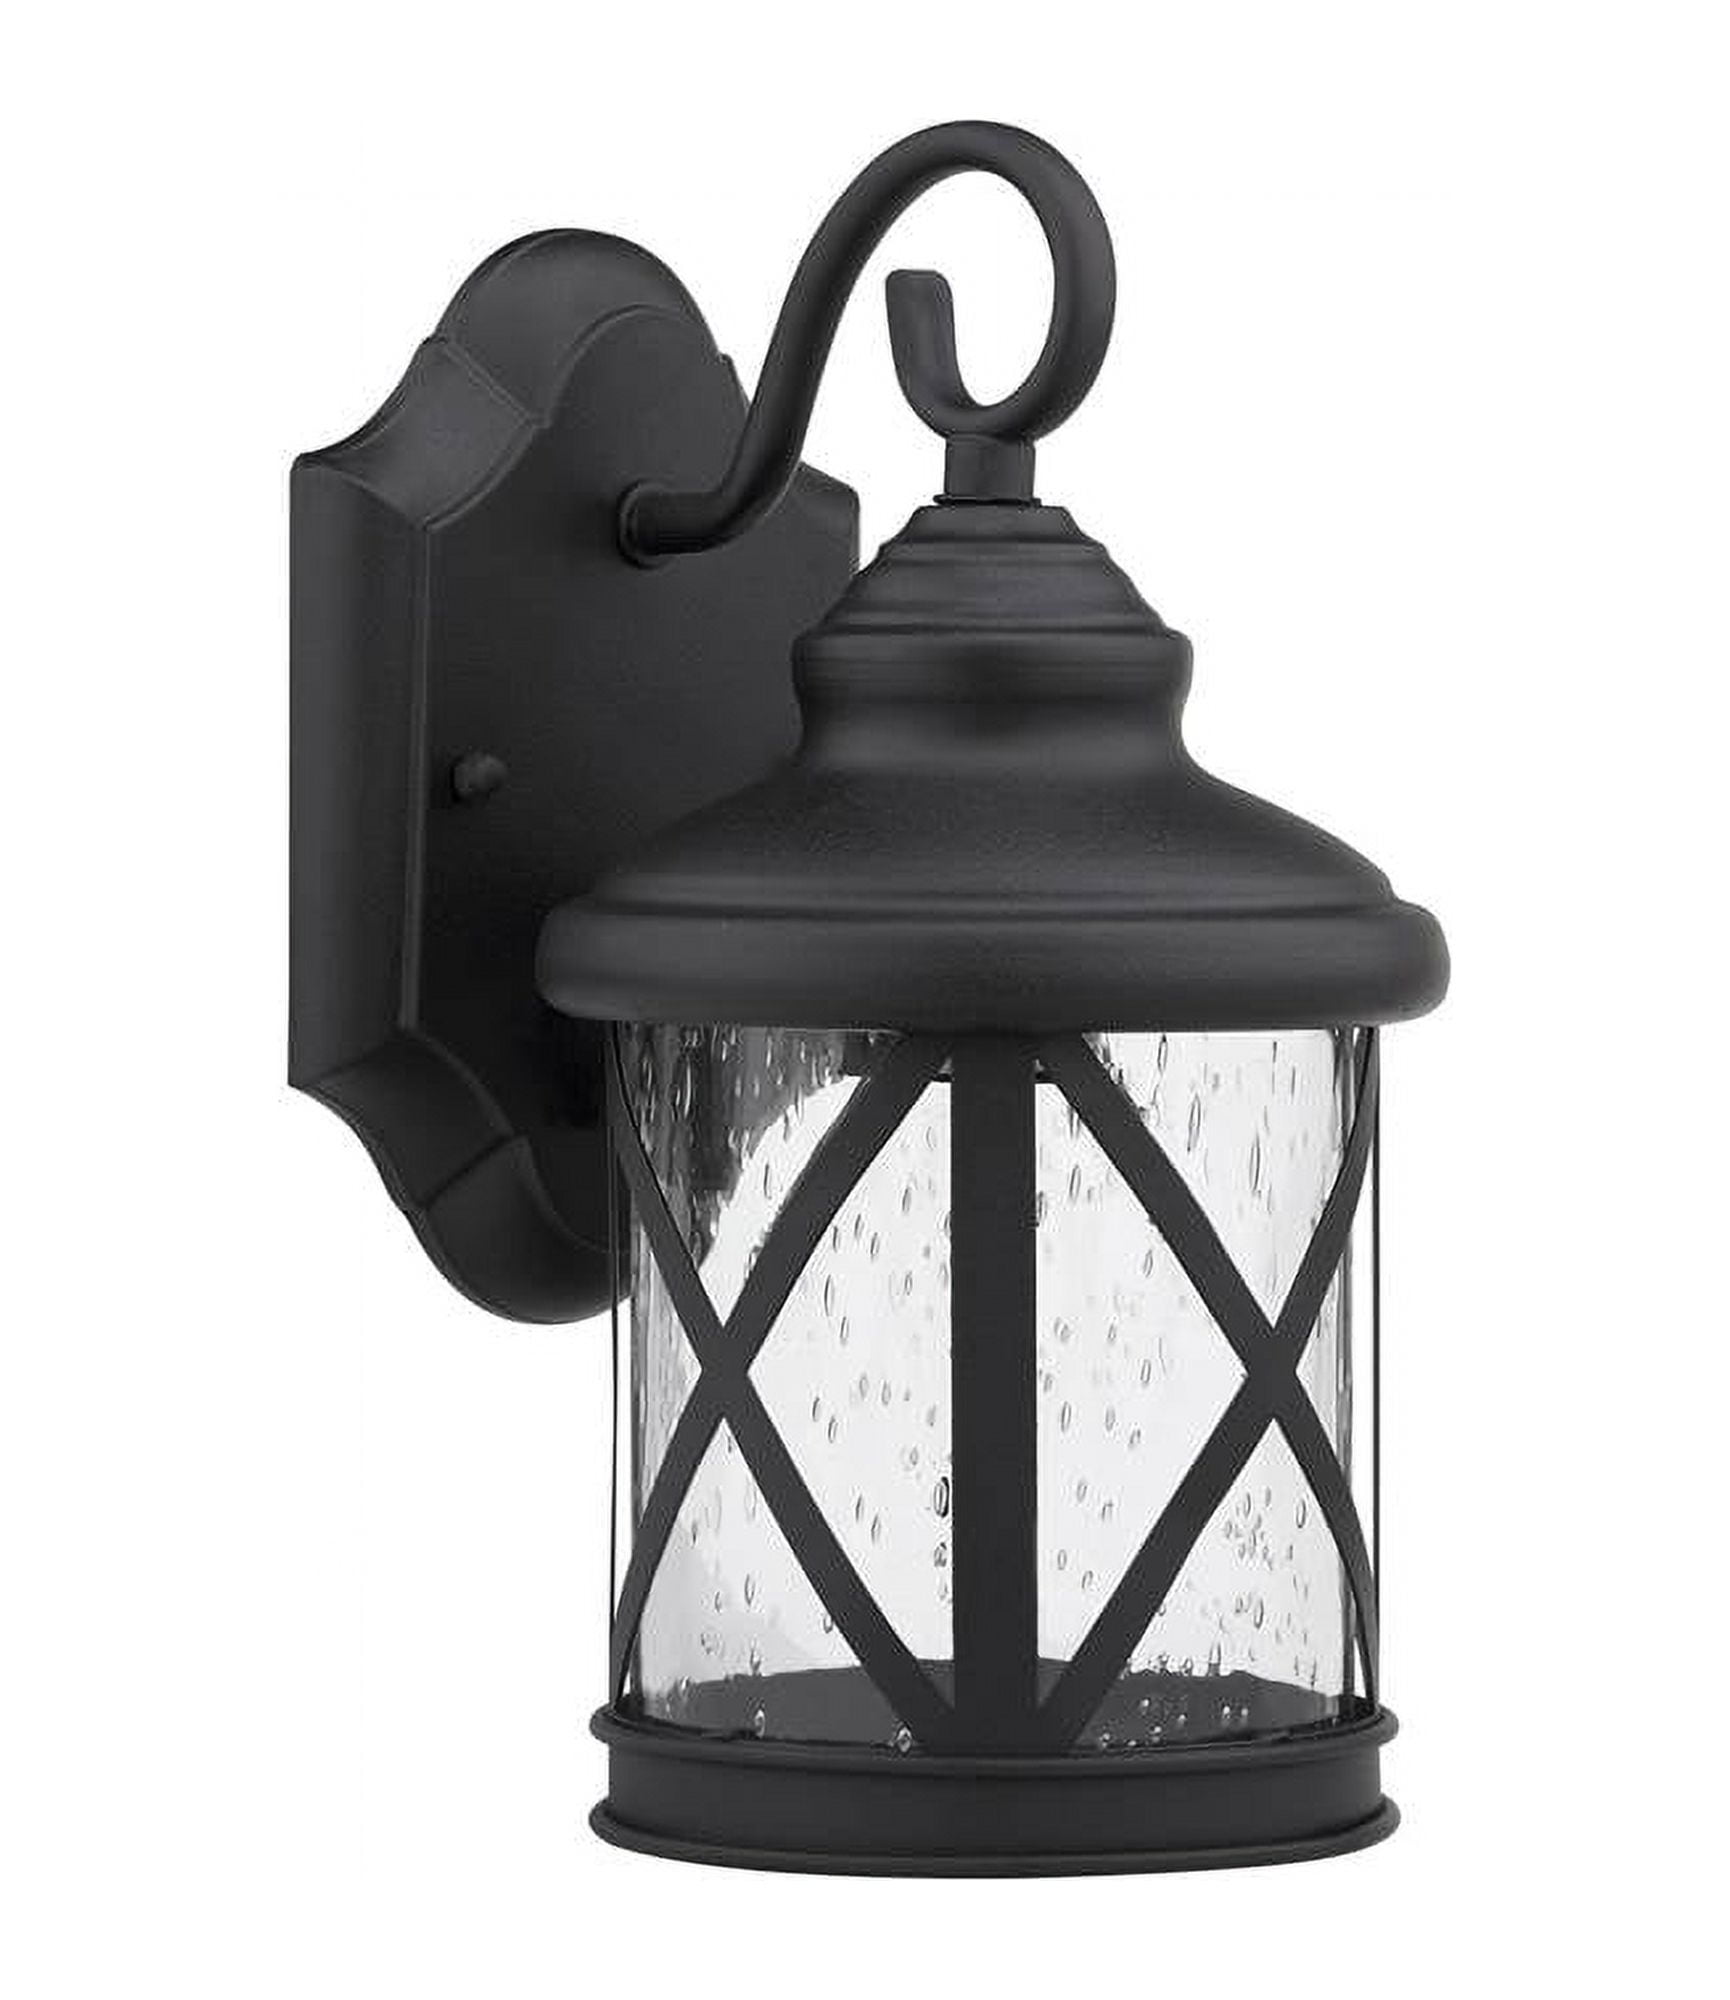 Ch25041bk16-od1 16 In. Lighting Milania Adora Transitional 1 Light Black Outdoor Wall Sconce - Textured Black